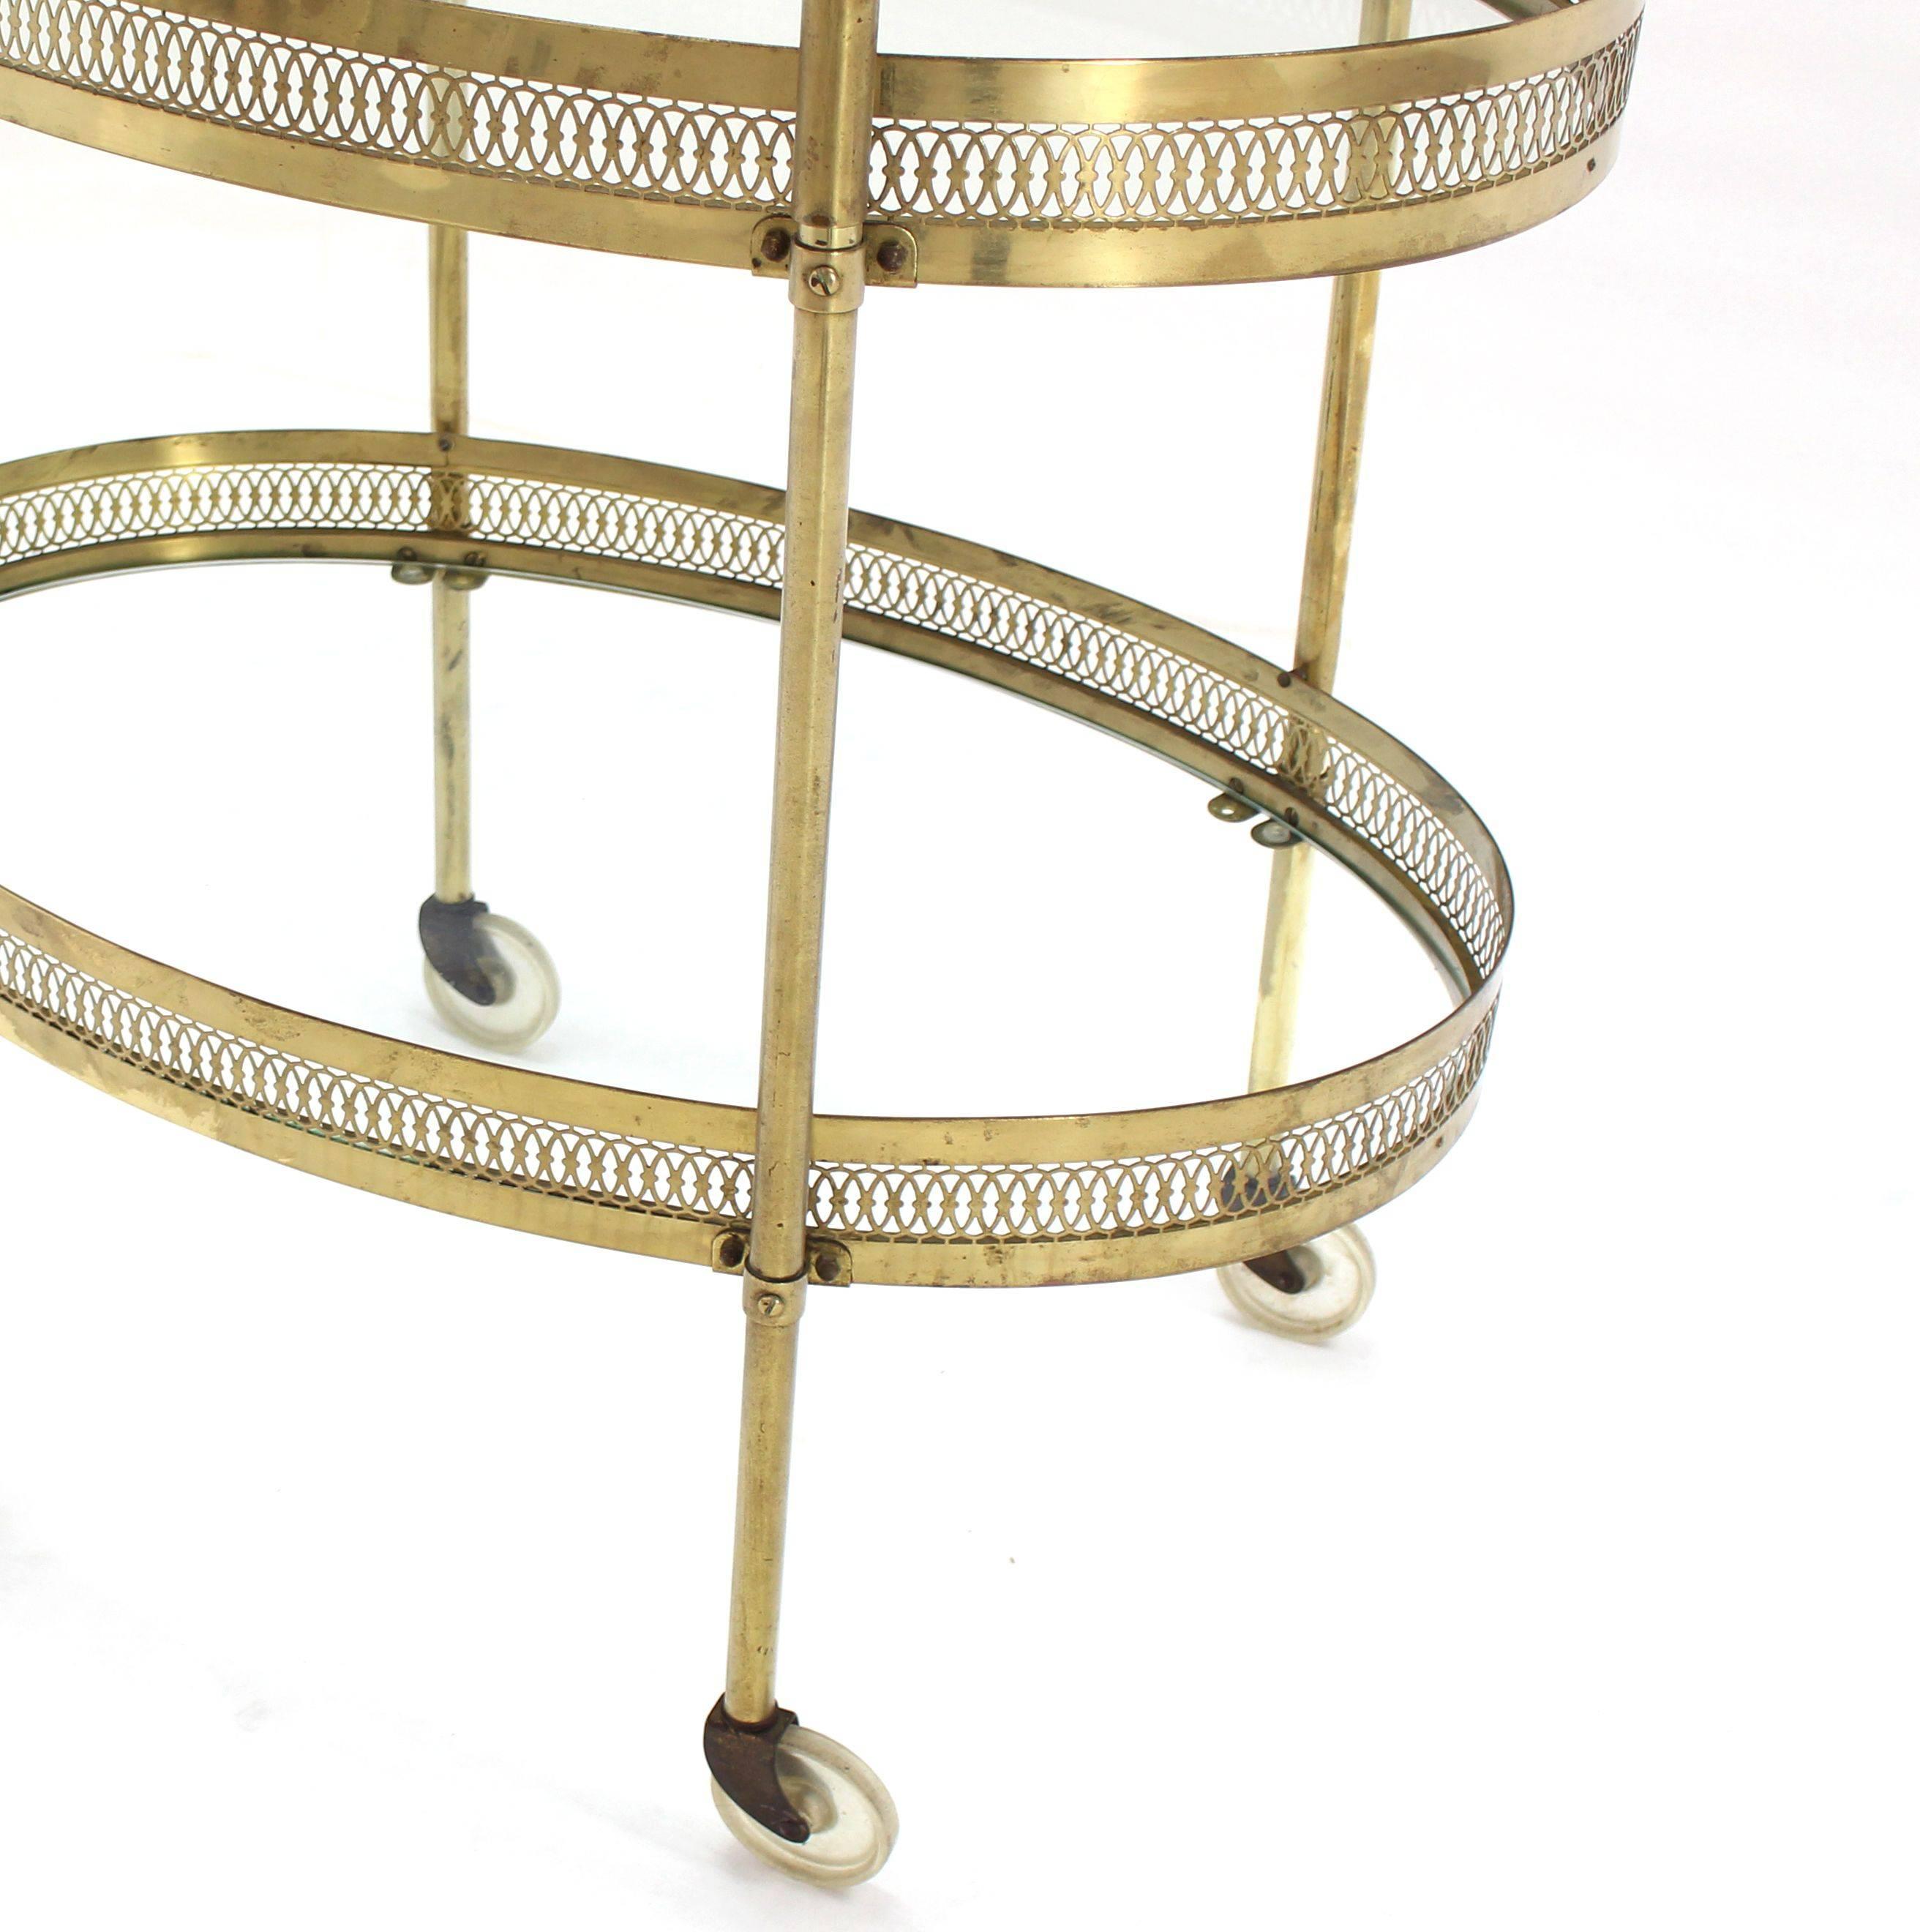 20th Century Oval Pierced Brass and Glass Two-Tier Tea Serving Cart on Wheels